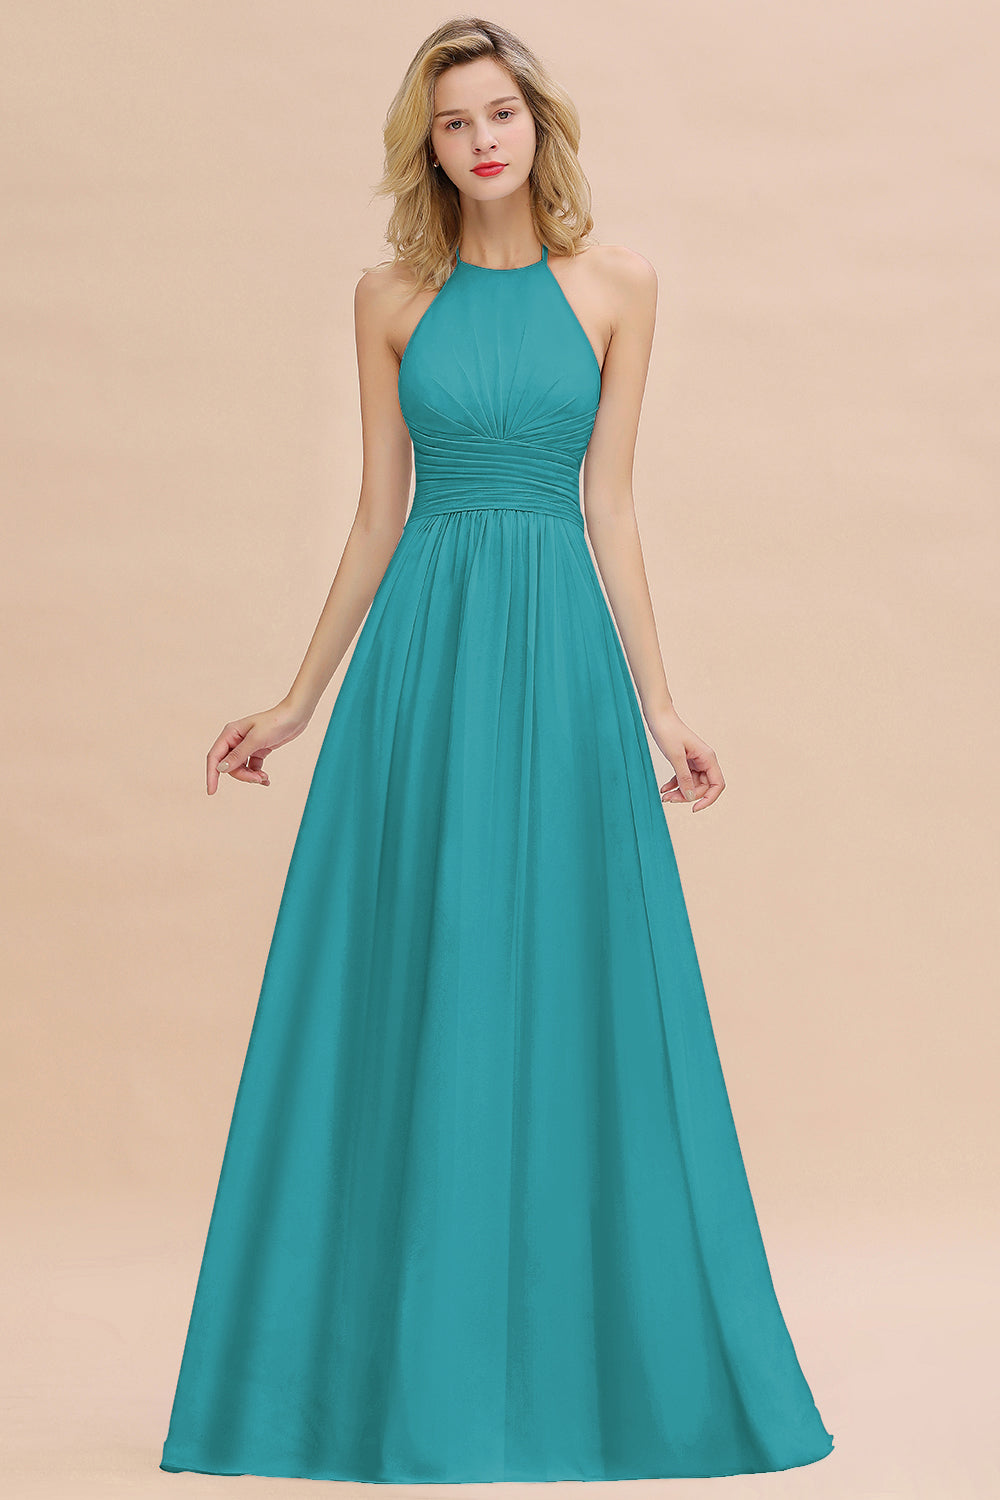 Glamorous Halter Backless Long Affordable Bridesmaid Dresses with Ruffle-27dress